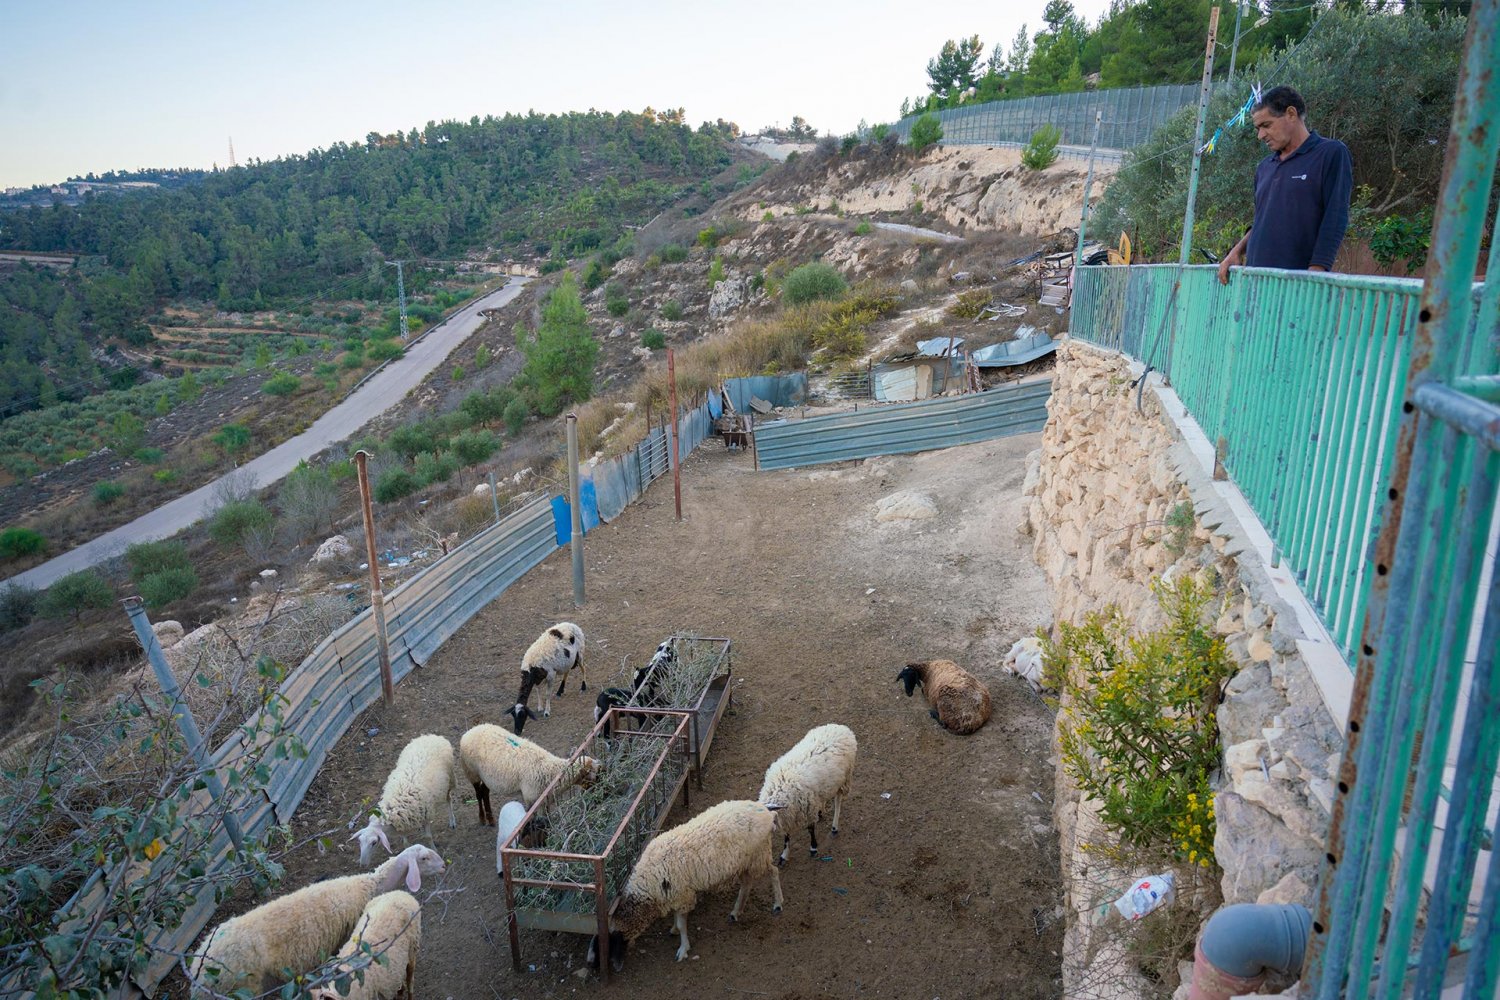 Omar Hajajla watches his grazing sheep, kept inside the ghettoized family complex since he is not allowed to build a pen.